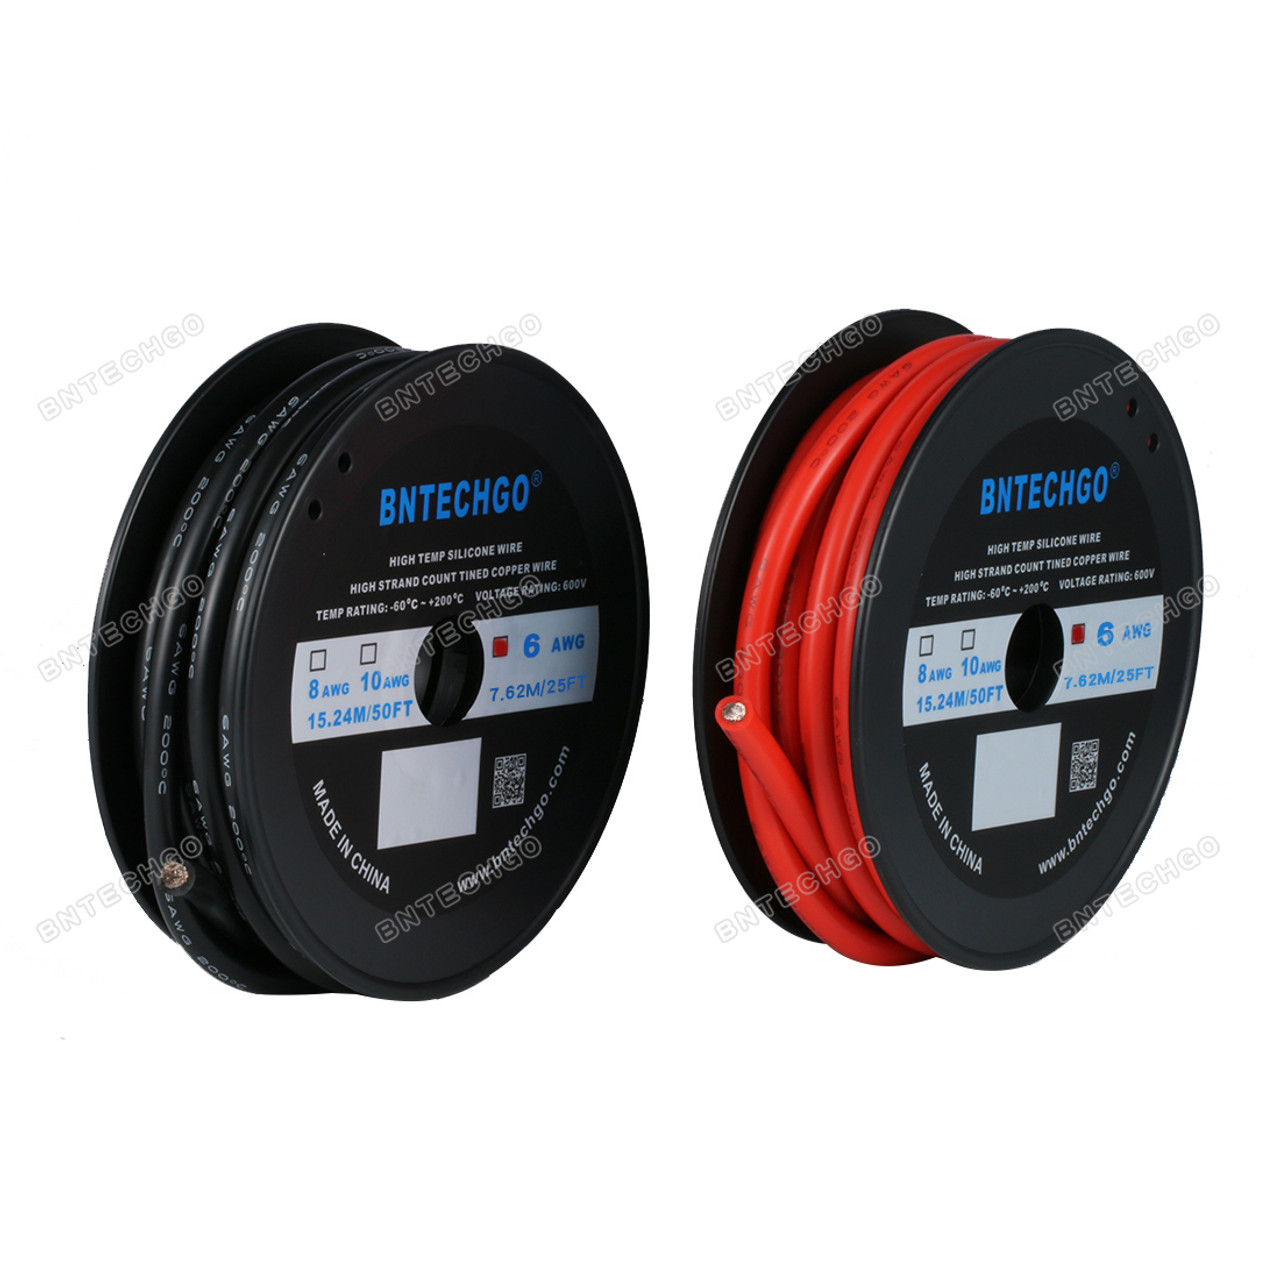 BNTECHGO 30 Gauge Silicone Wire Spool Red and Black Each 25ft 2